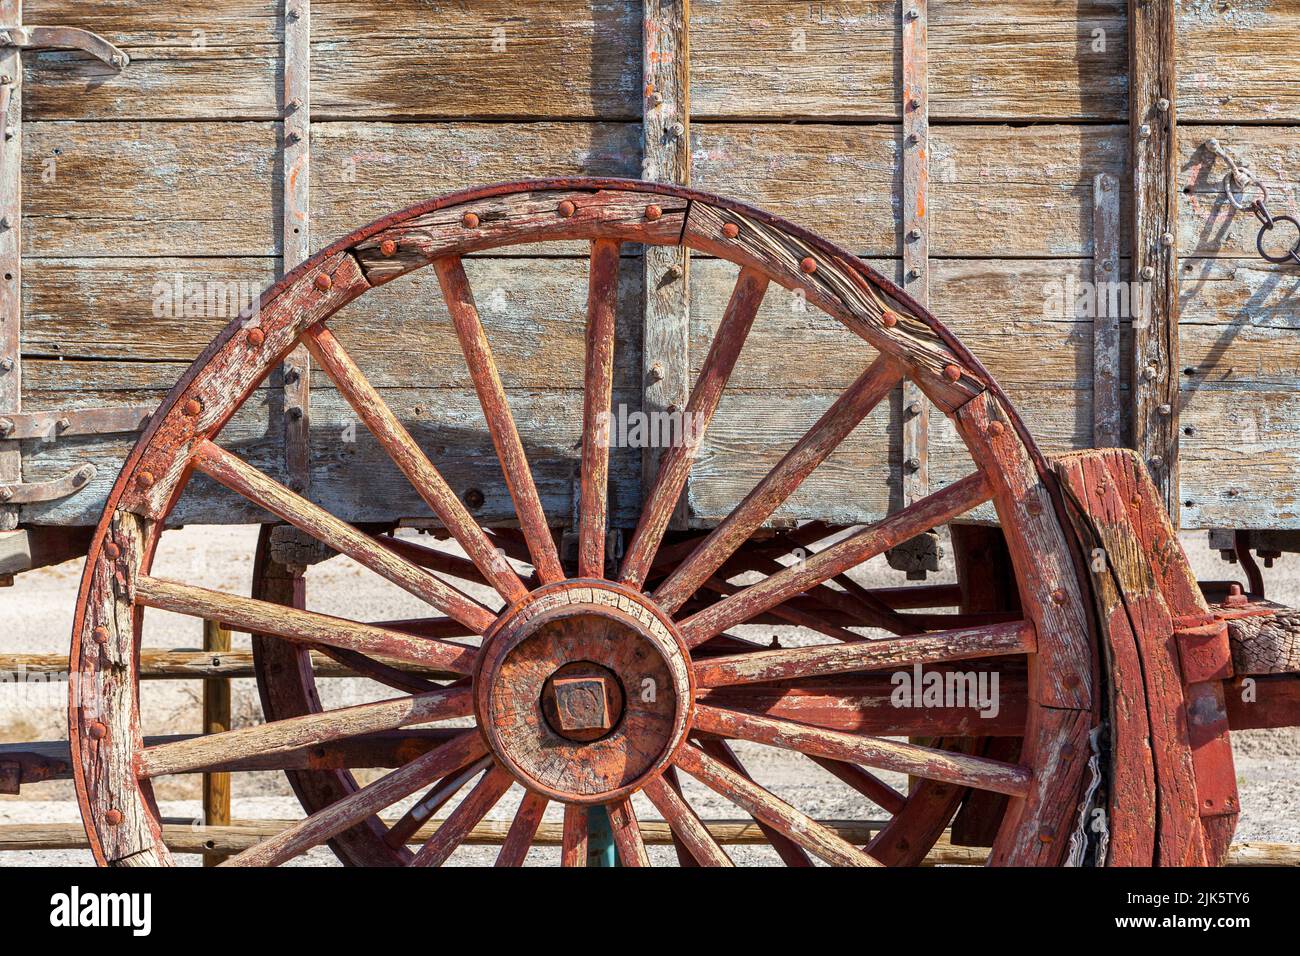 The spoked wheel on an old wooden wagon Stock Photo